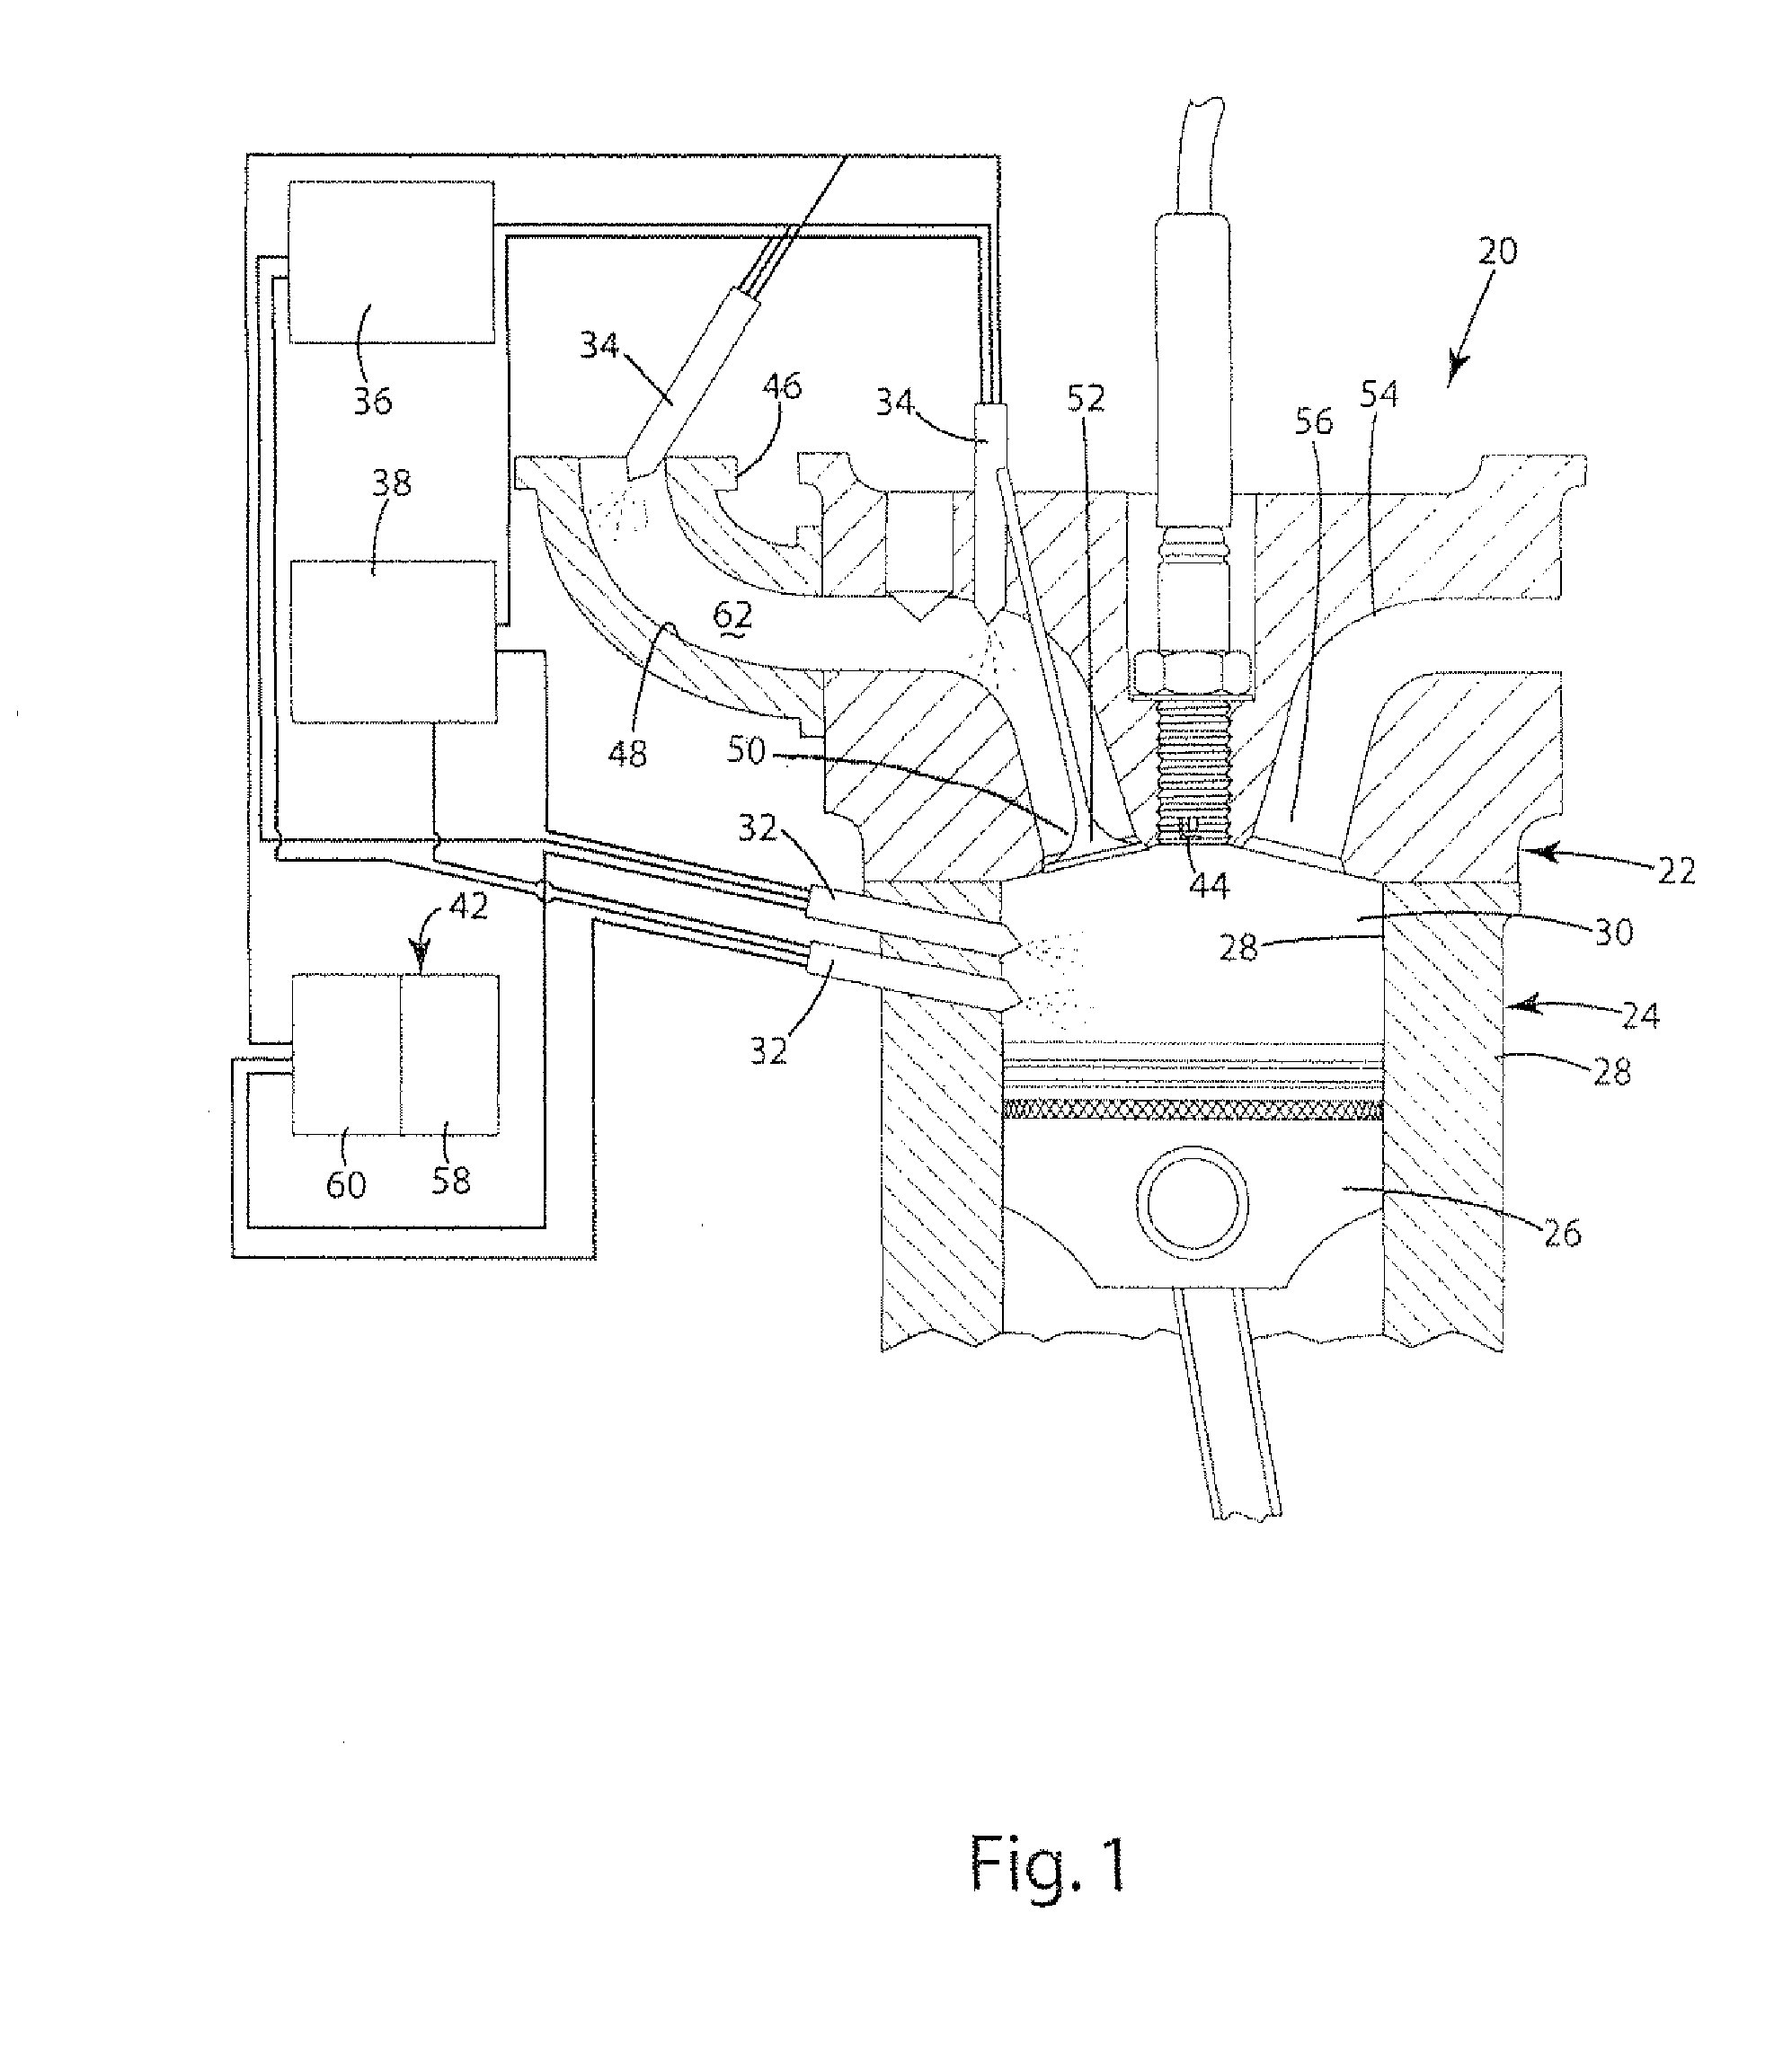 Methods Of Controlling An Internal Combustion Engine Including Multiple Fuels And Multiple Injectors